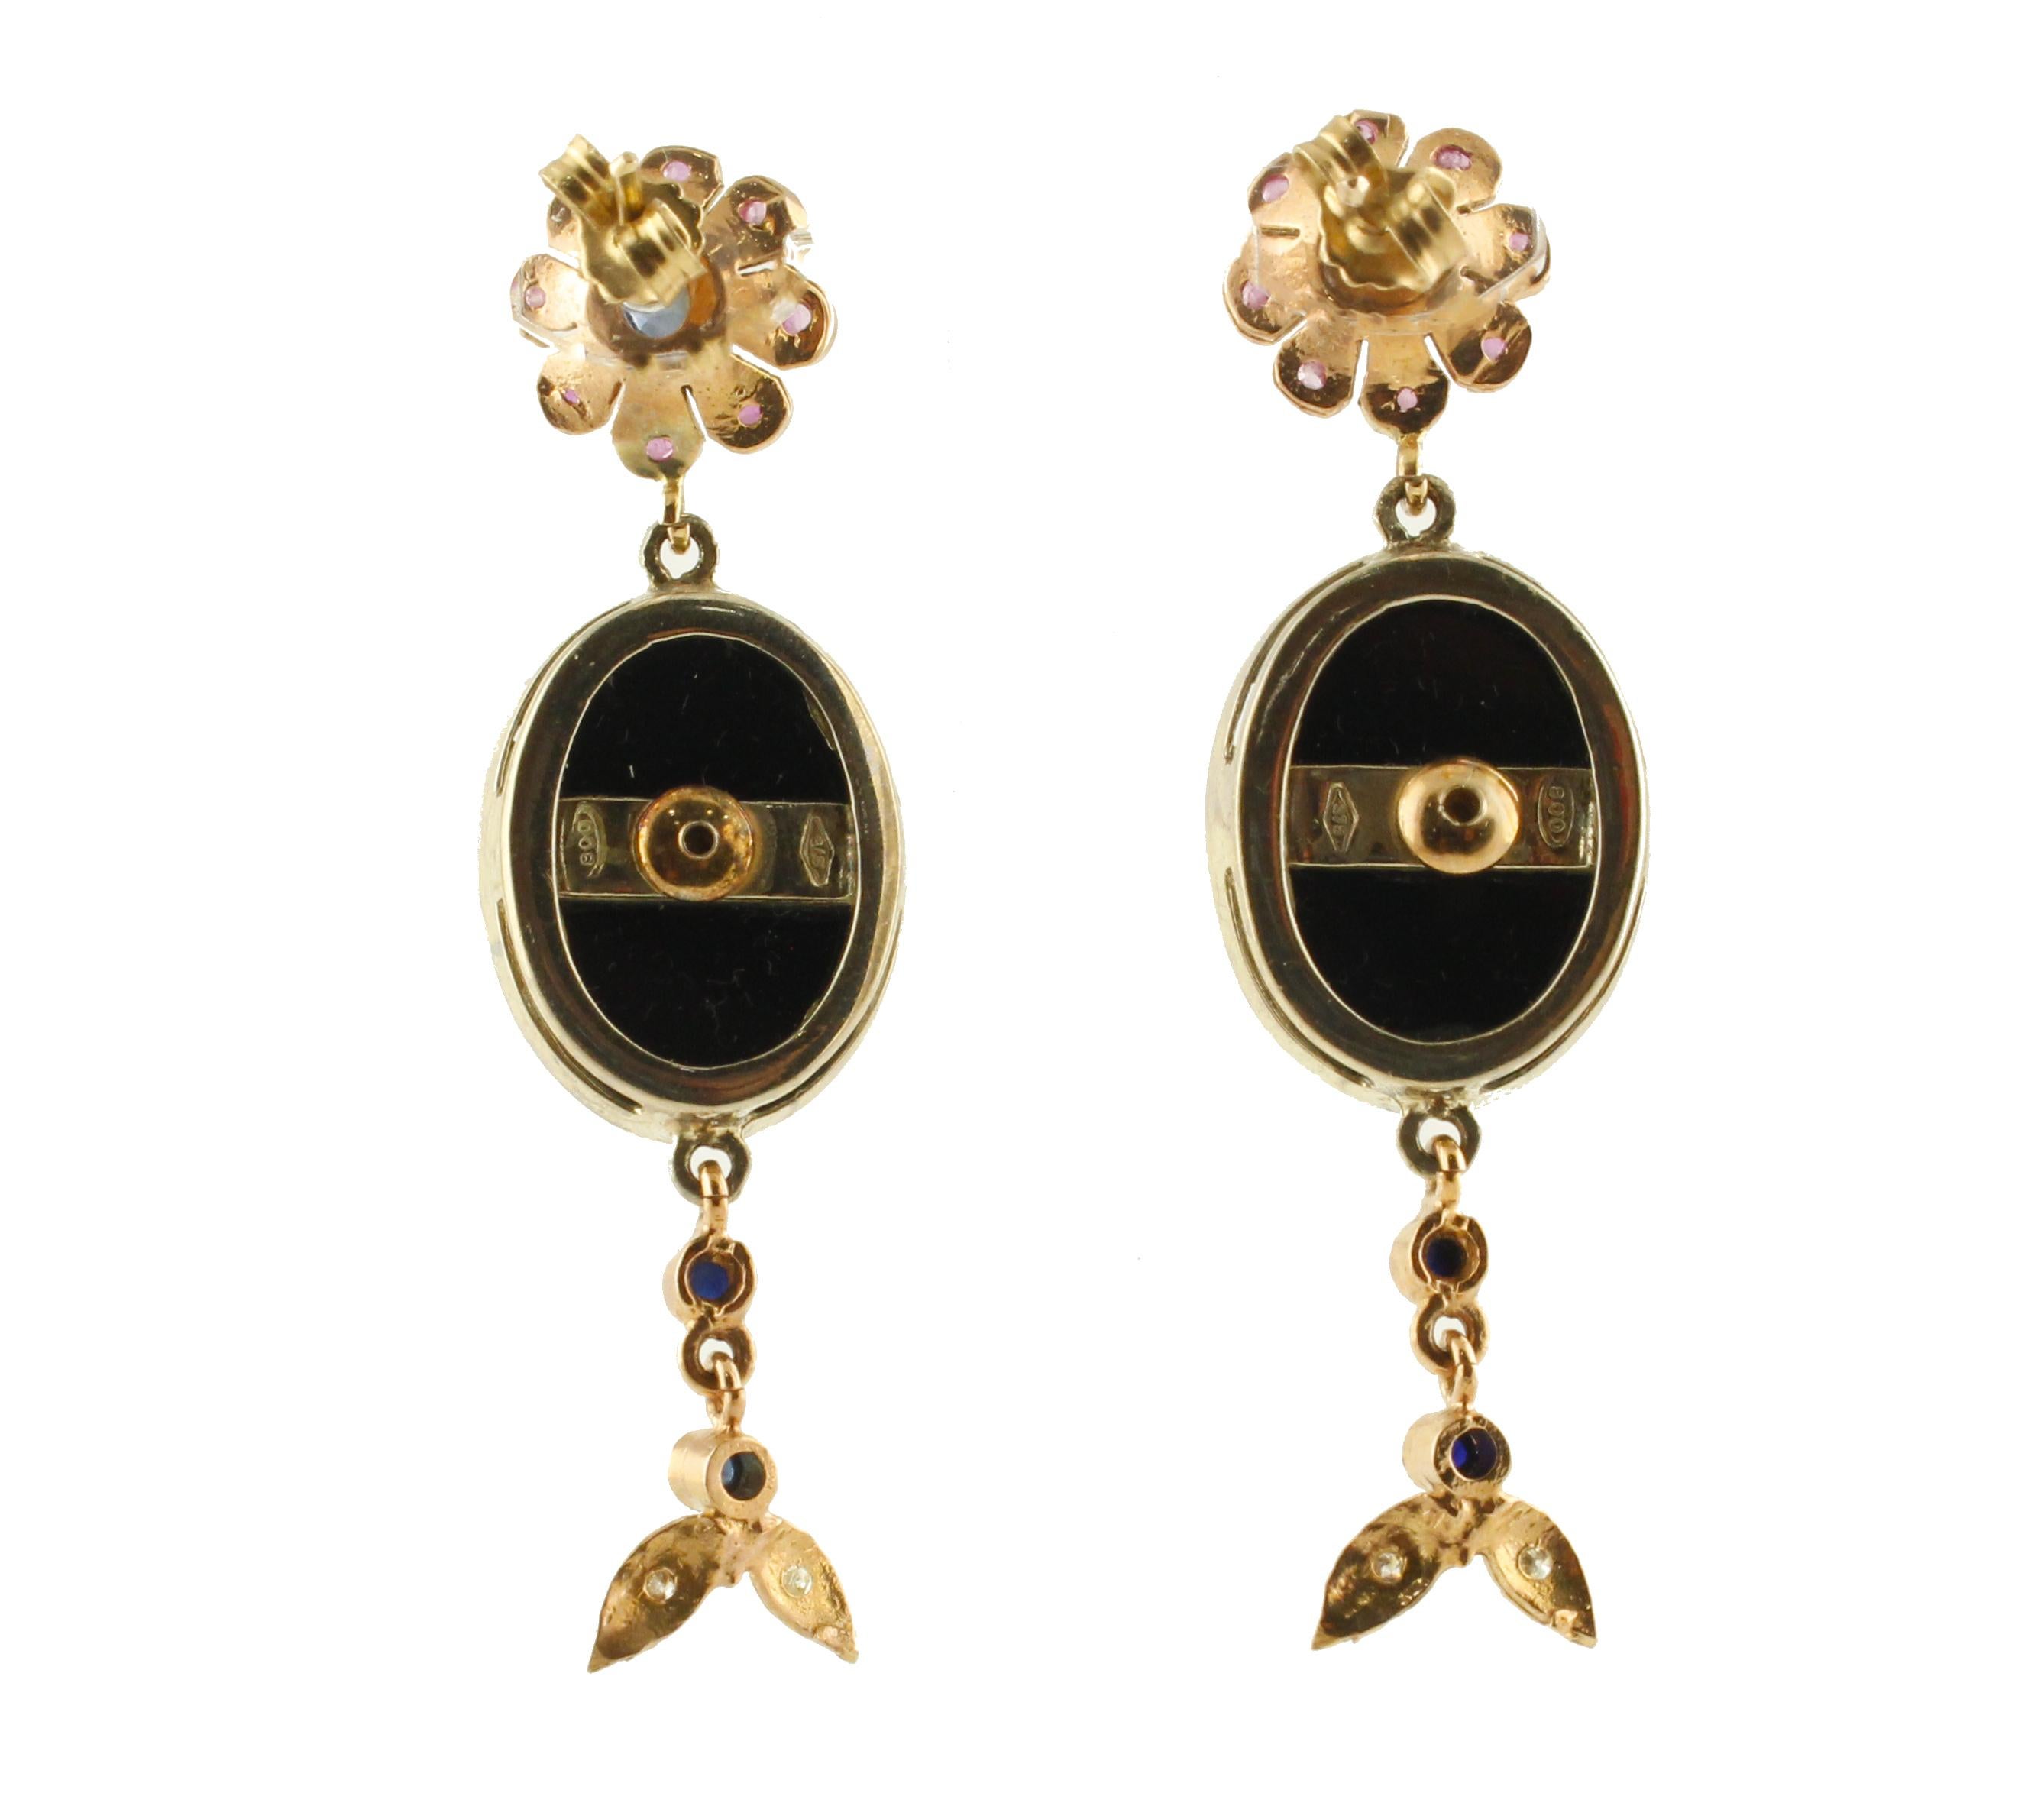 Elegant earrings in 9K rose gold and silver structure, composed of blu sapphires and rubies flowers at the top of the earrings, in the middle there are two onyx botton with a rose gold flowers and diamonds in the center. At the bottom of the